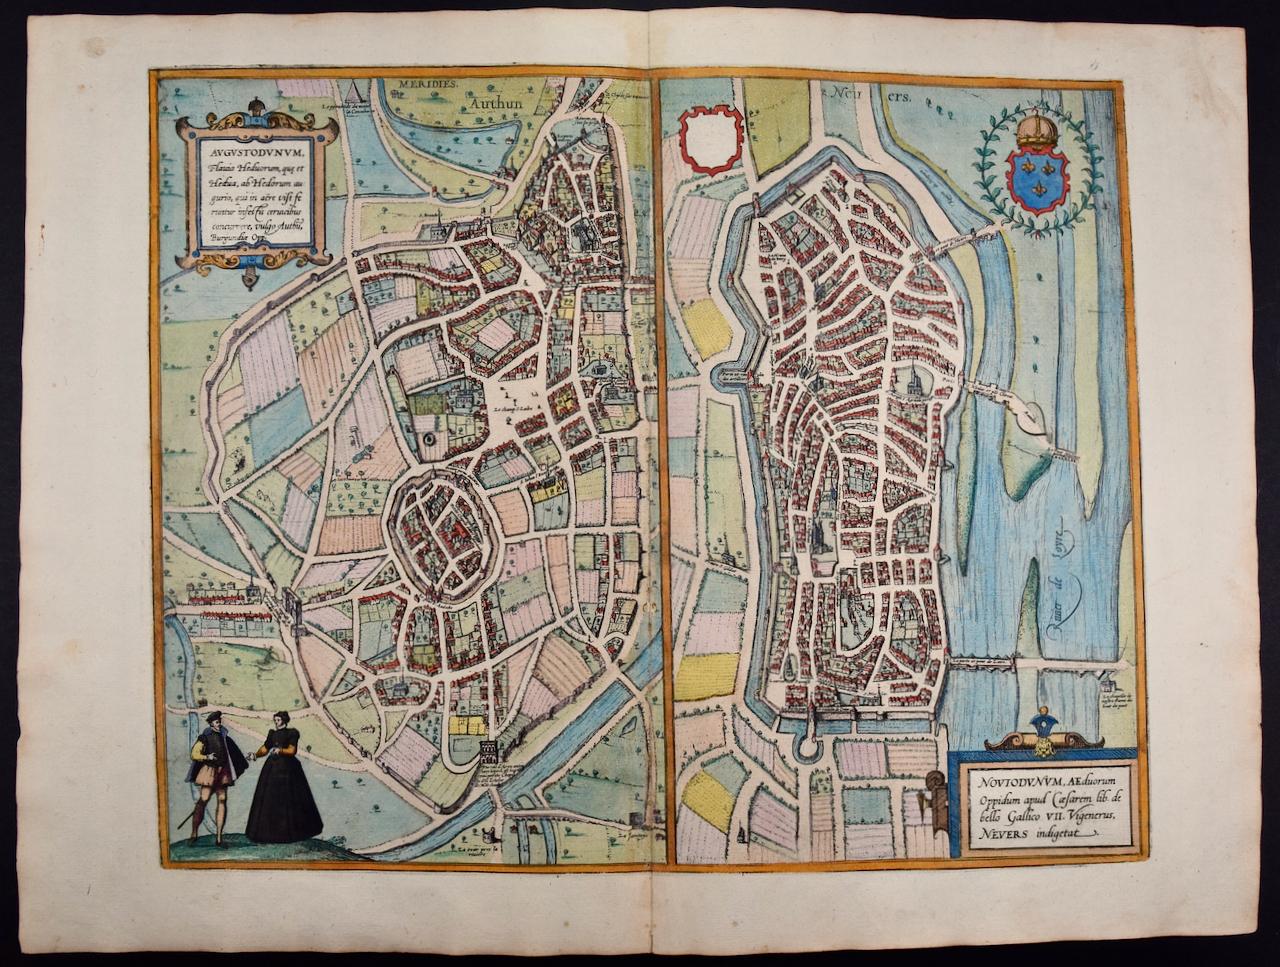 Frans Hogenberg Print - Nevers & Autun France: 16th Century Hand-colored Map by Braun & Hogenberg